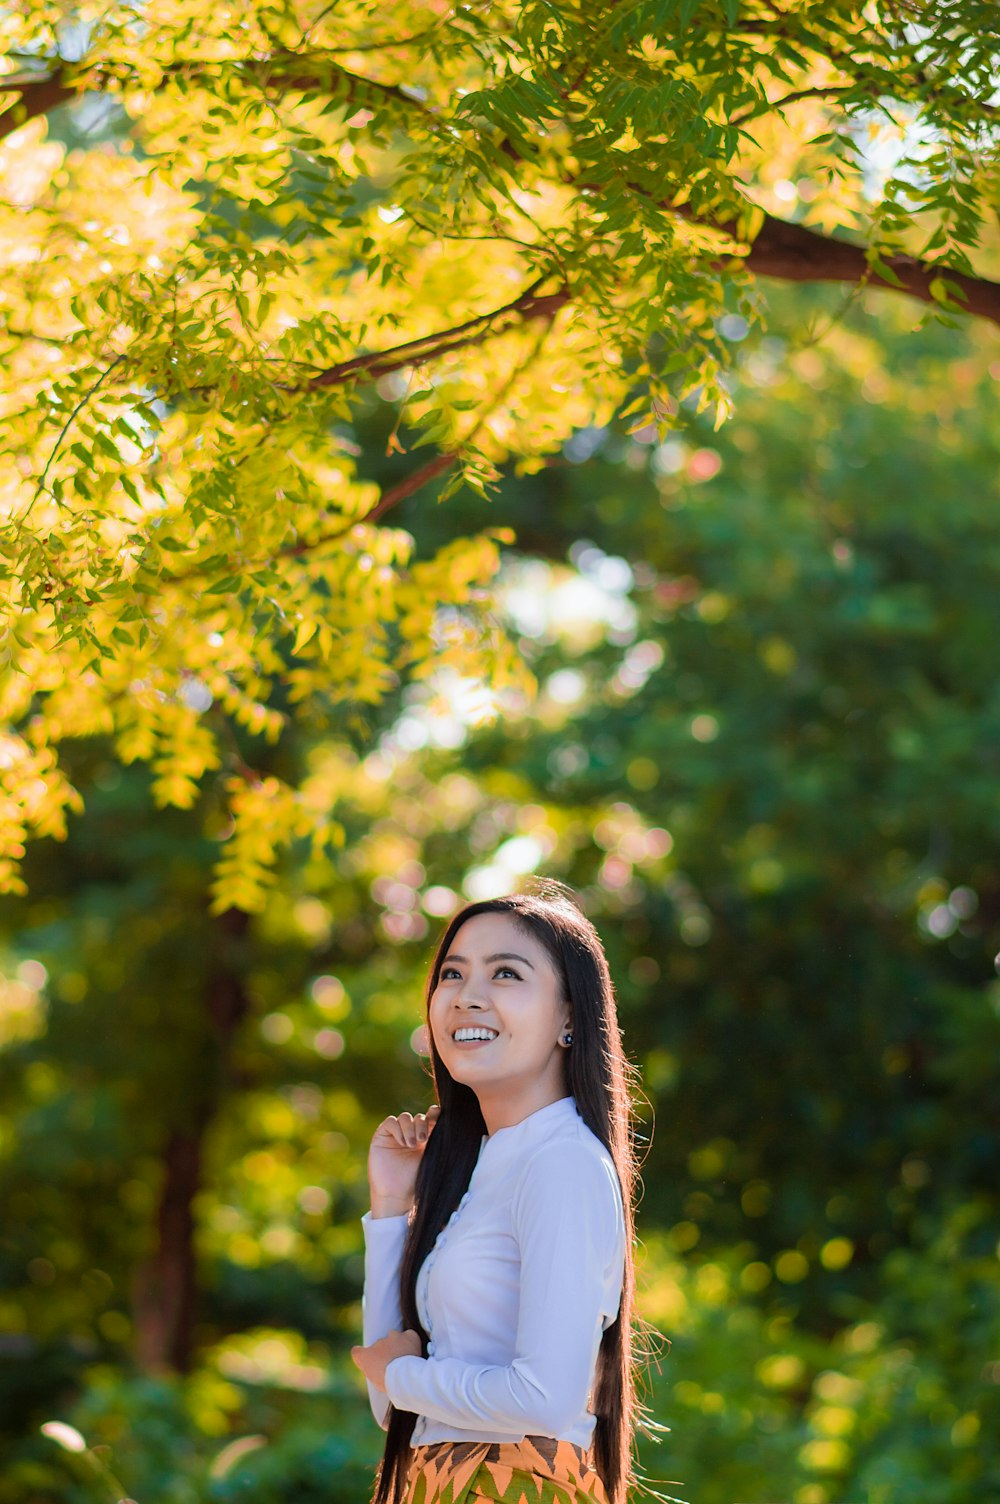 woman in white shirt standing under green tree during daytime